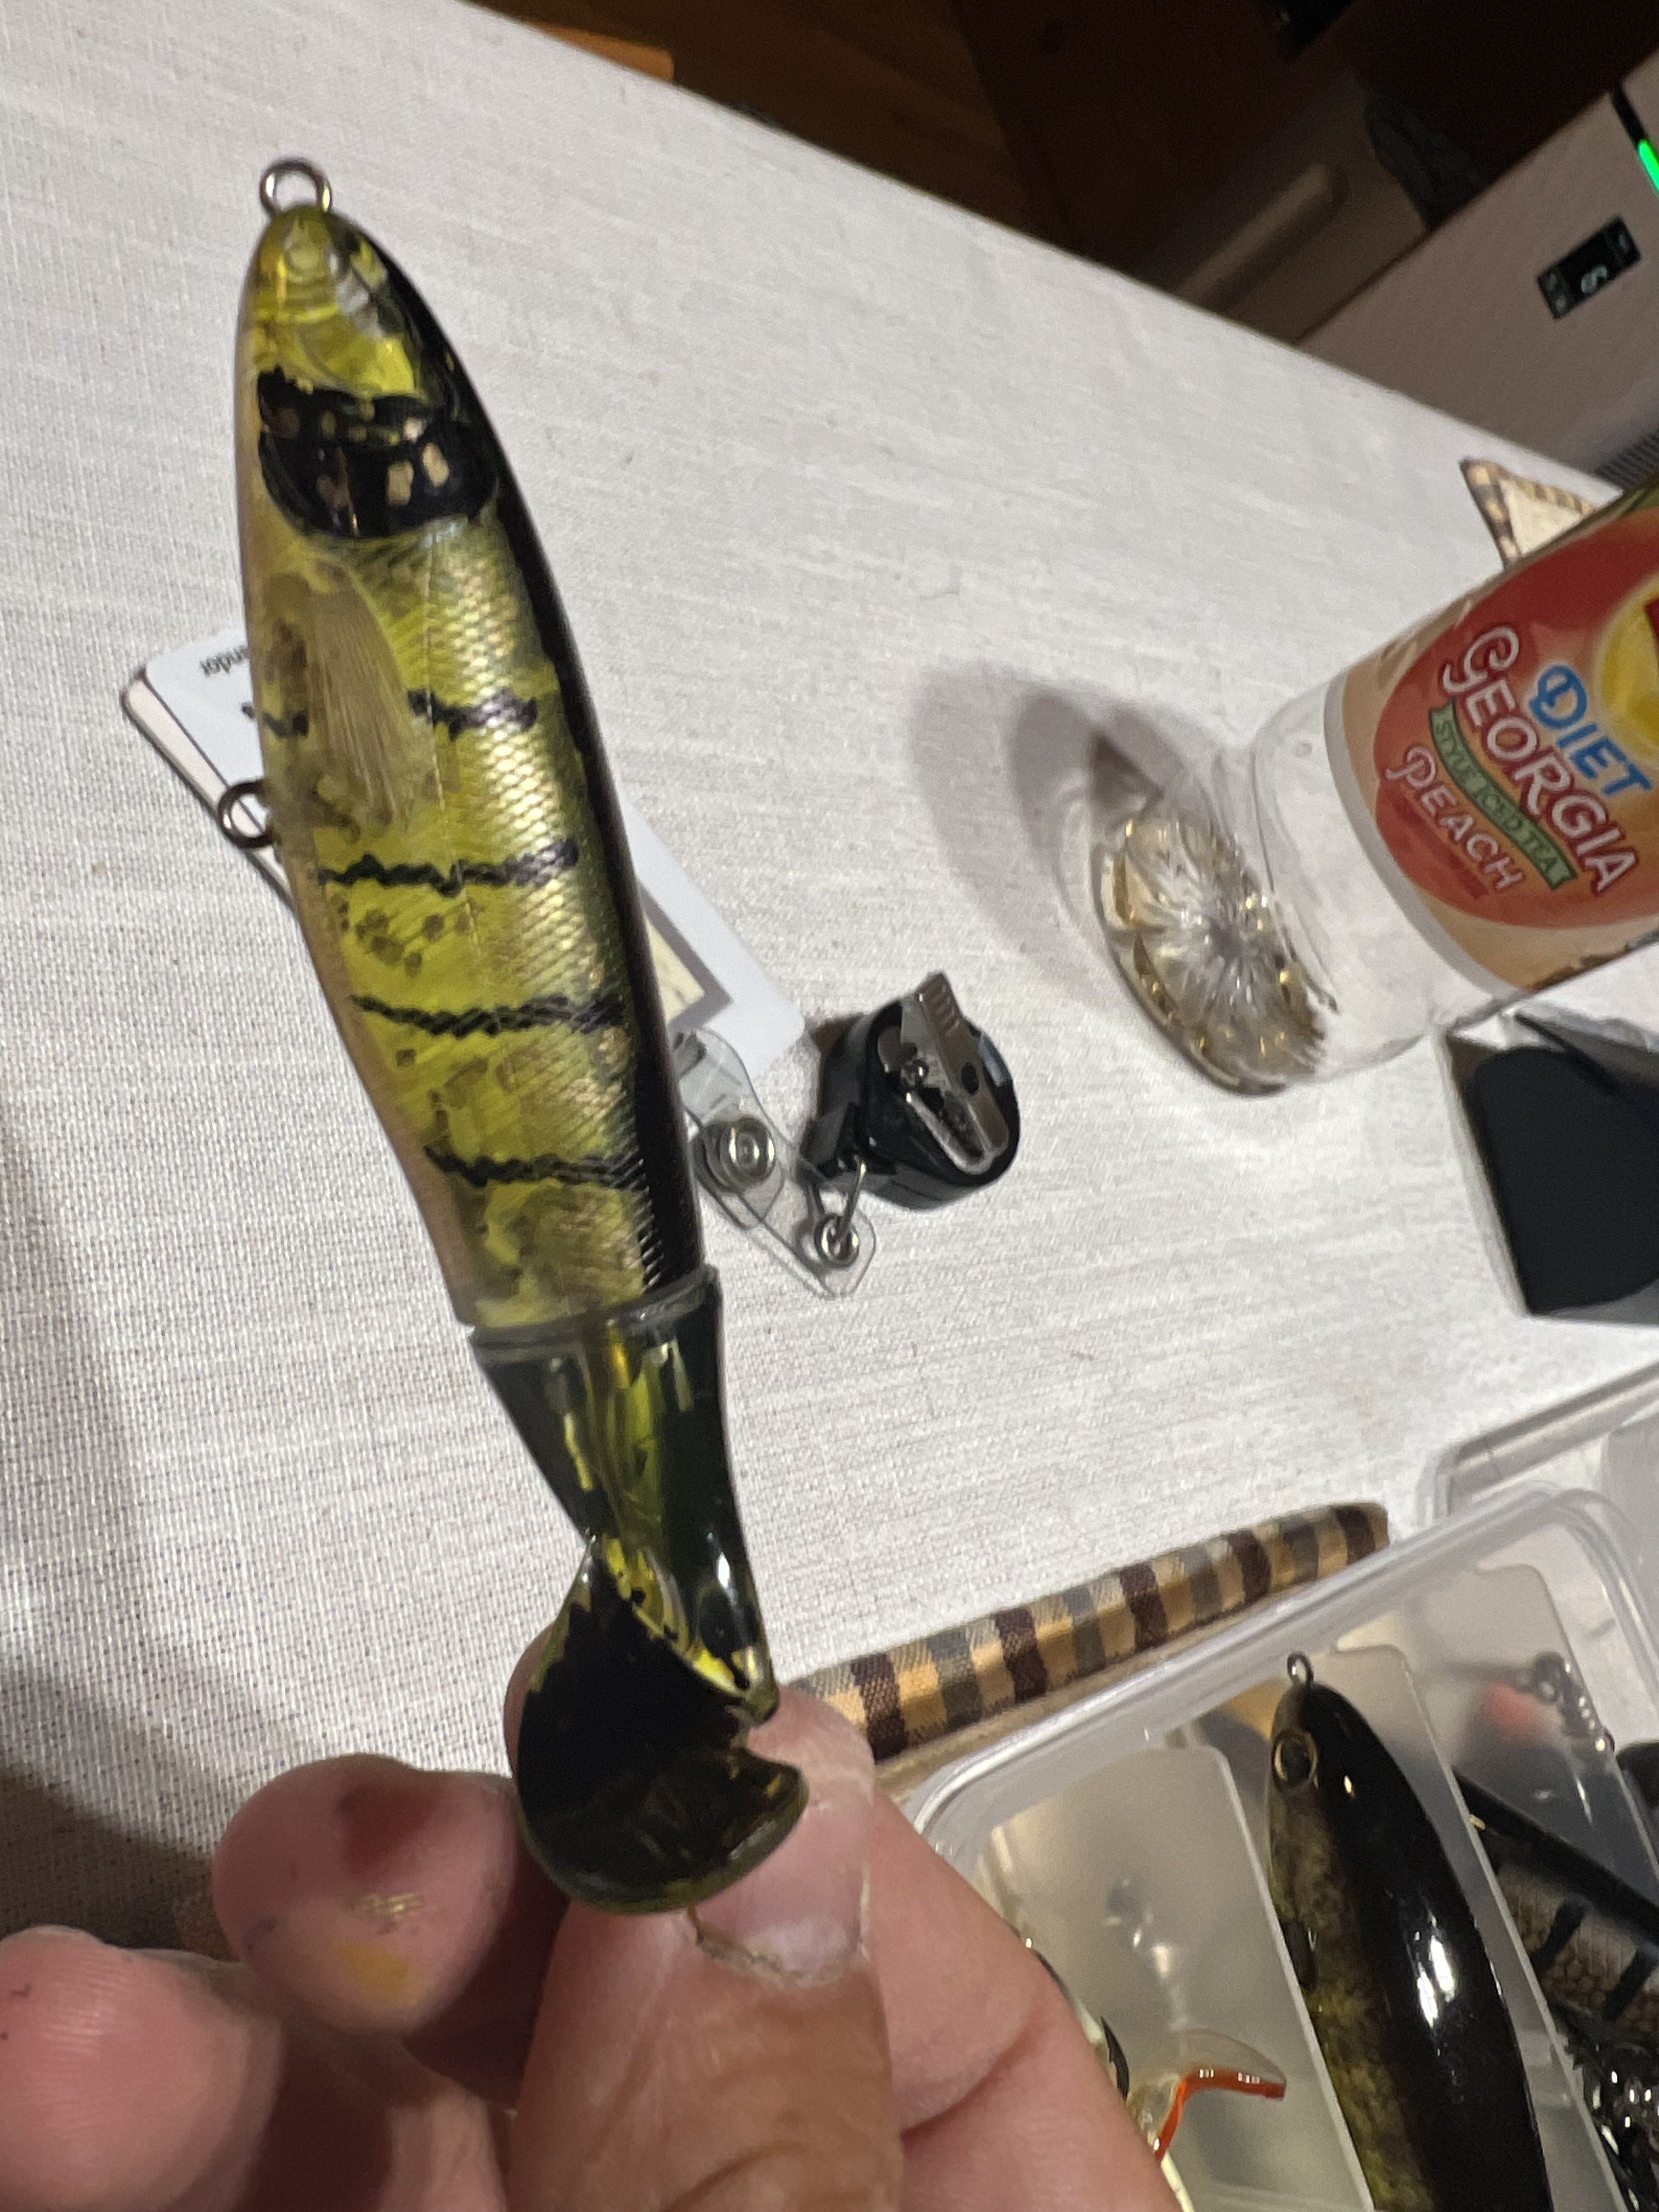 Painting Hardbaits With Sharpies? - Hard Baits -  -  Tackle Building Forums